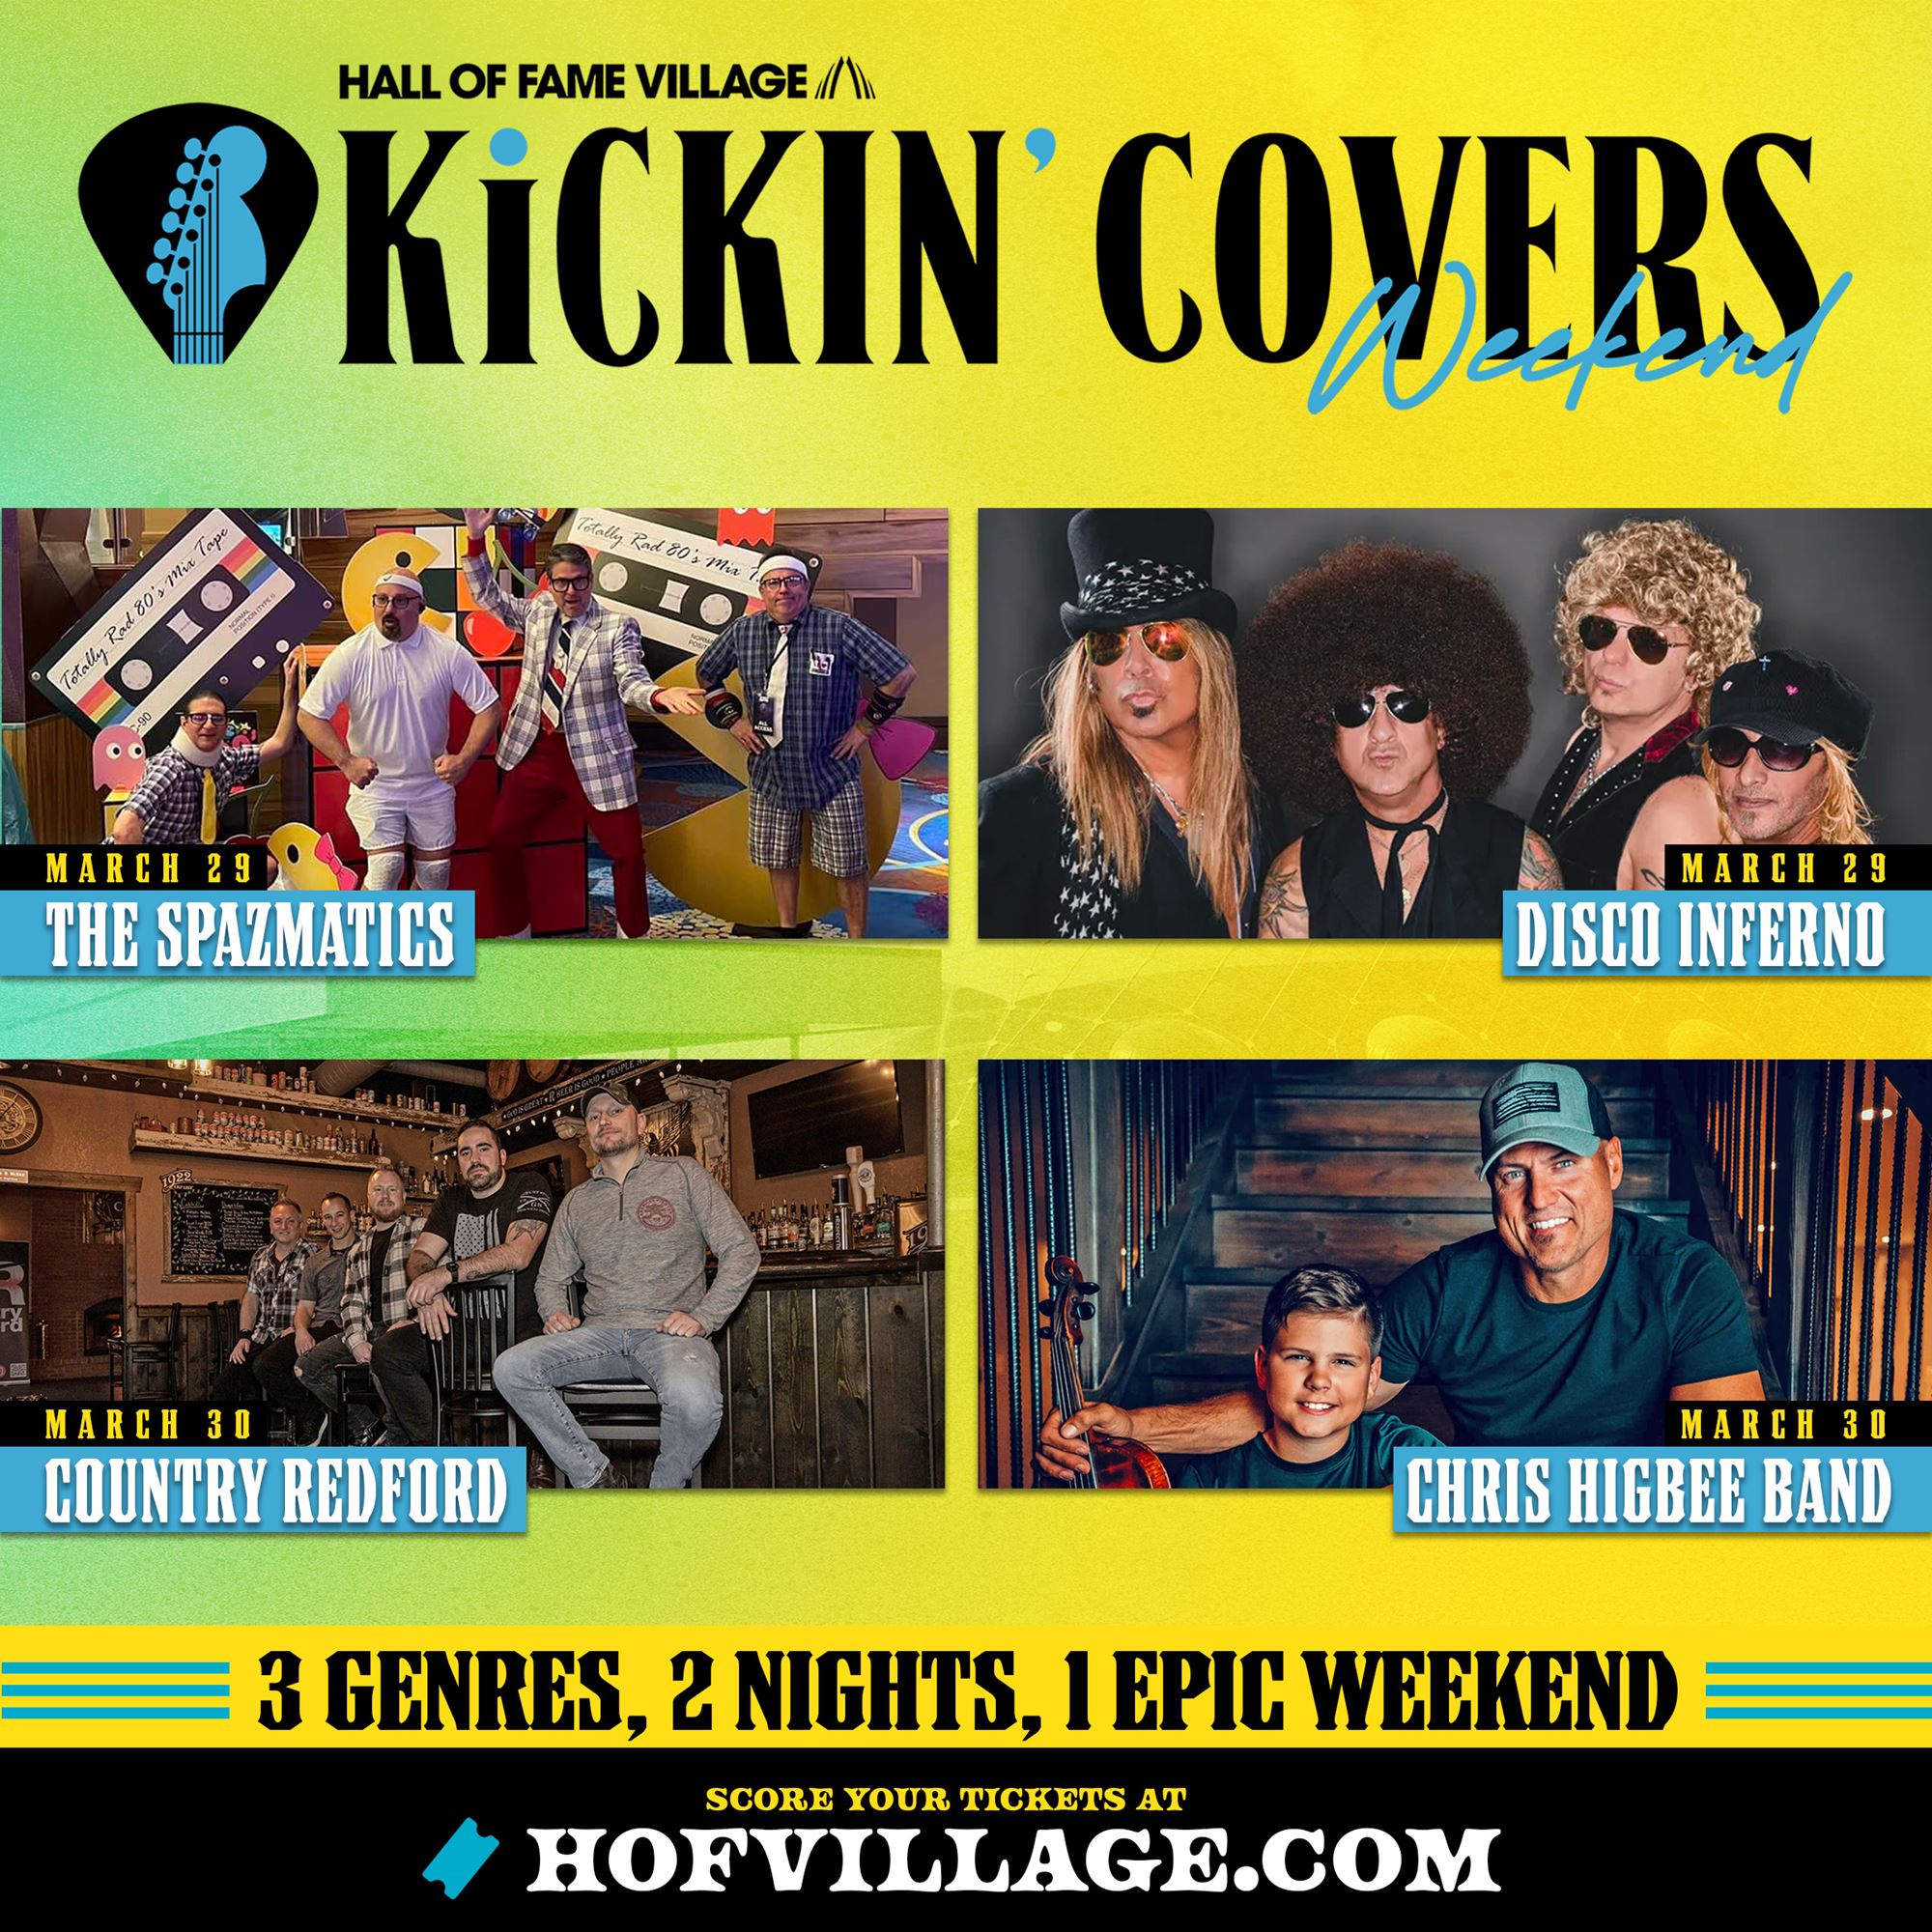 Kickin’ Covers Takes Center Stage At Hall Of Fame Village